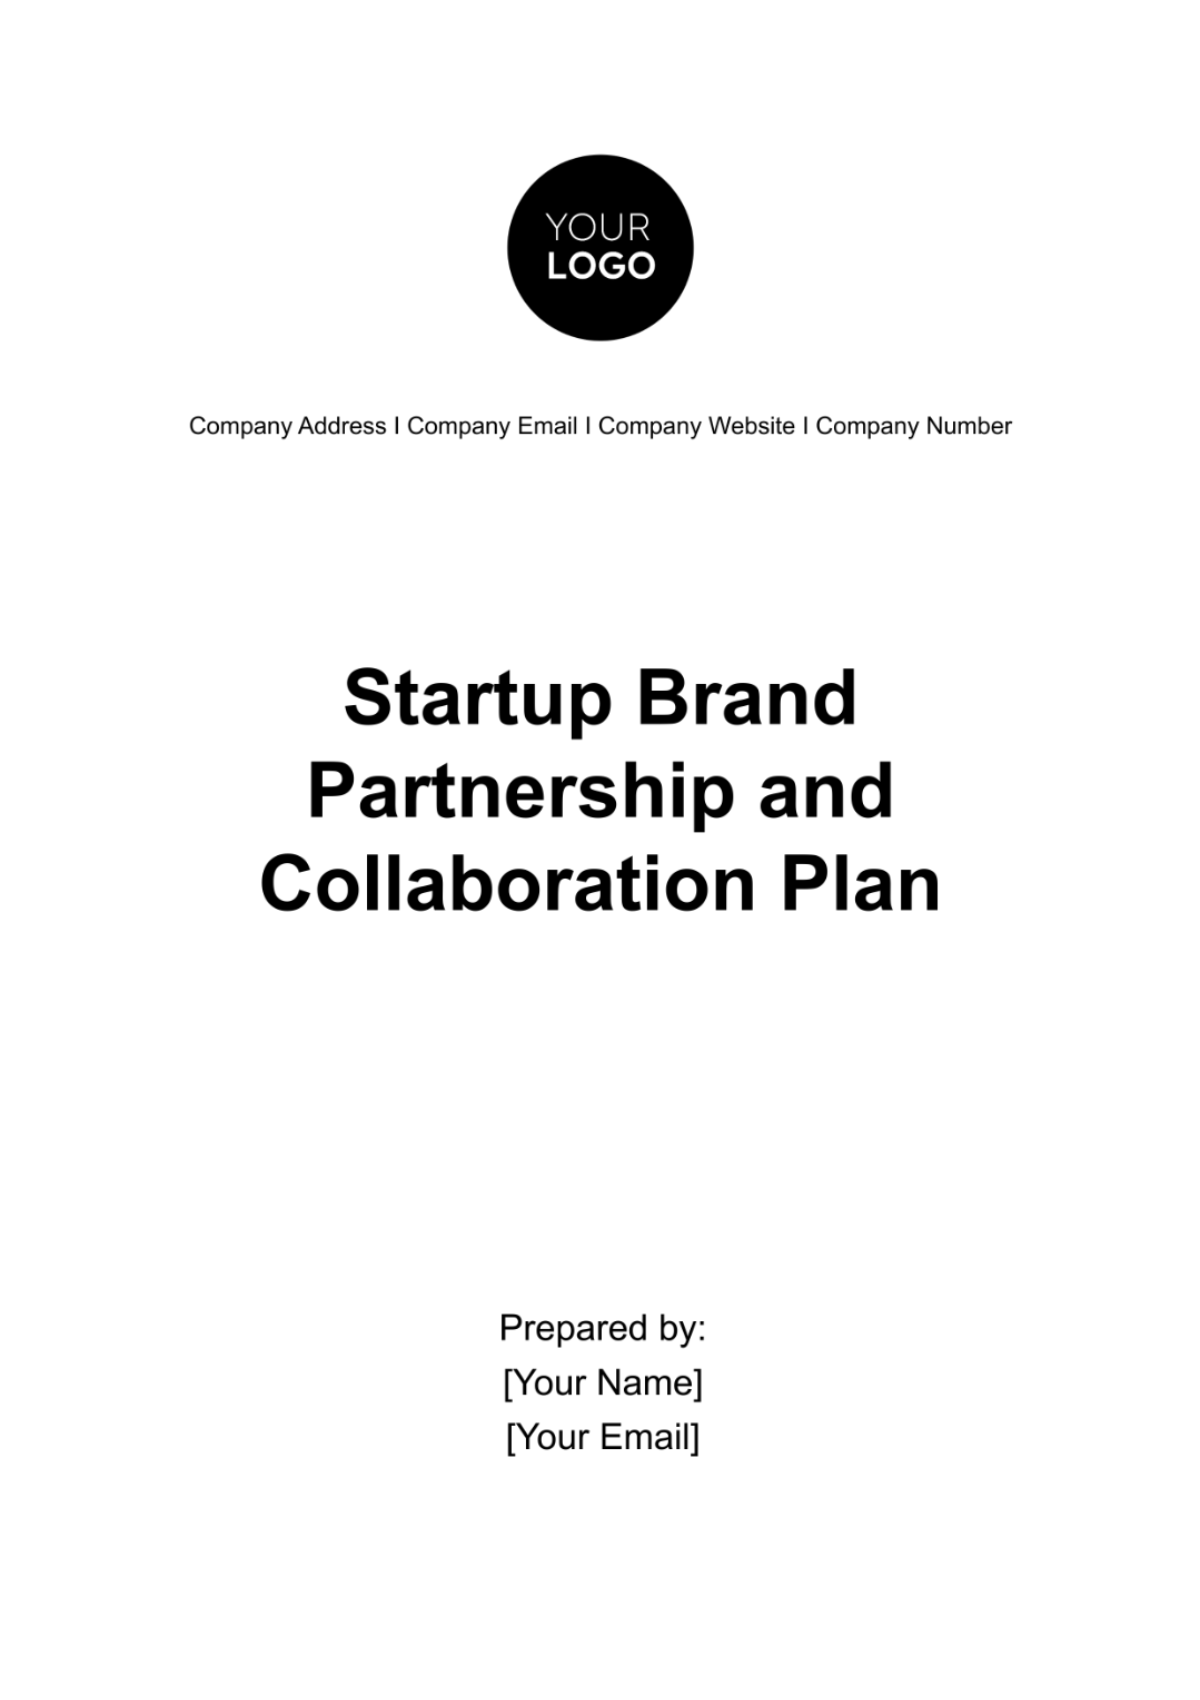 Free Startup Brand Partnership and Collaboration Plan Template